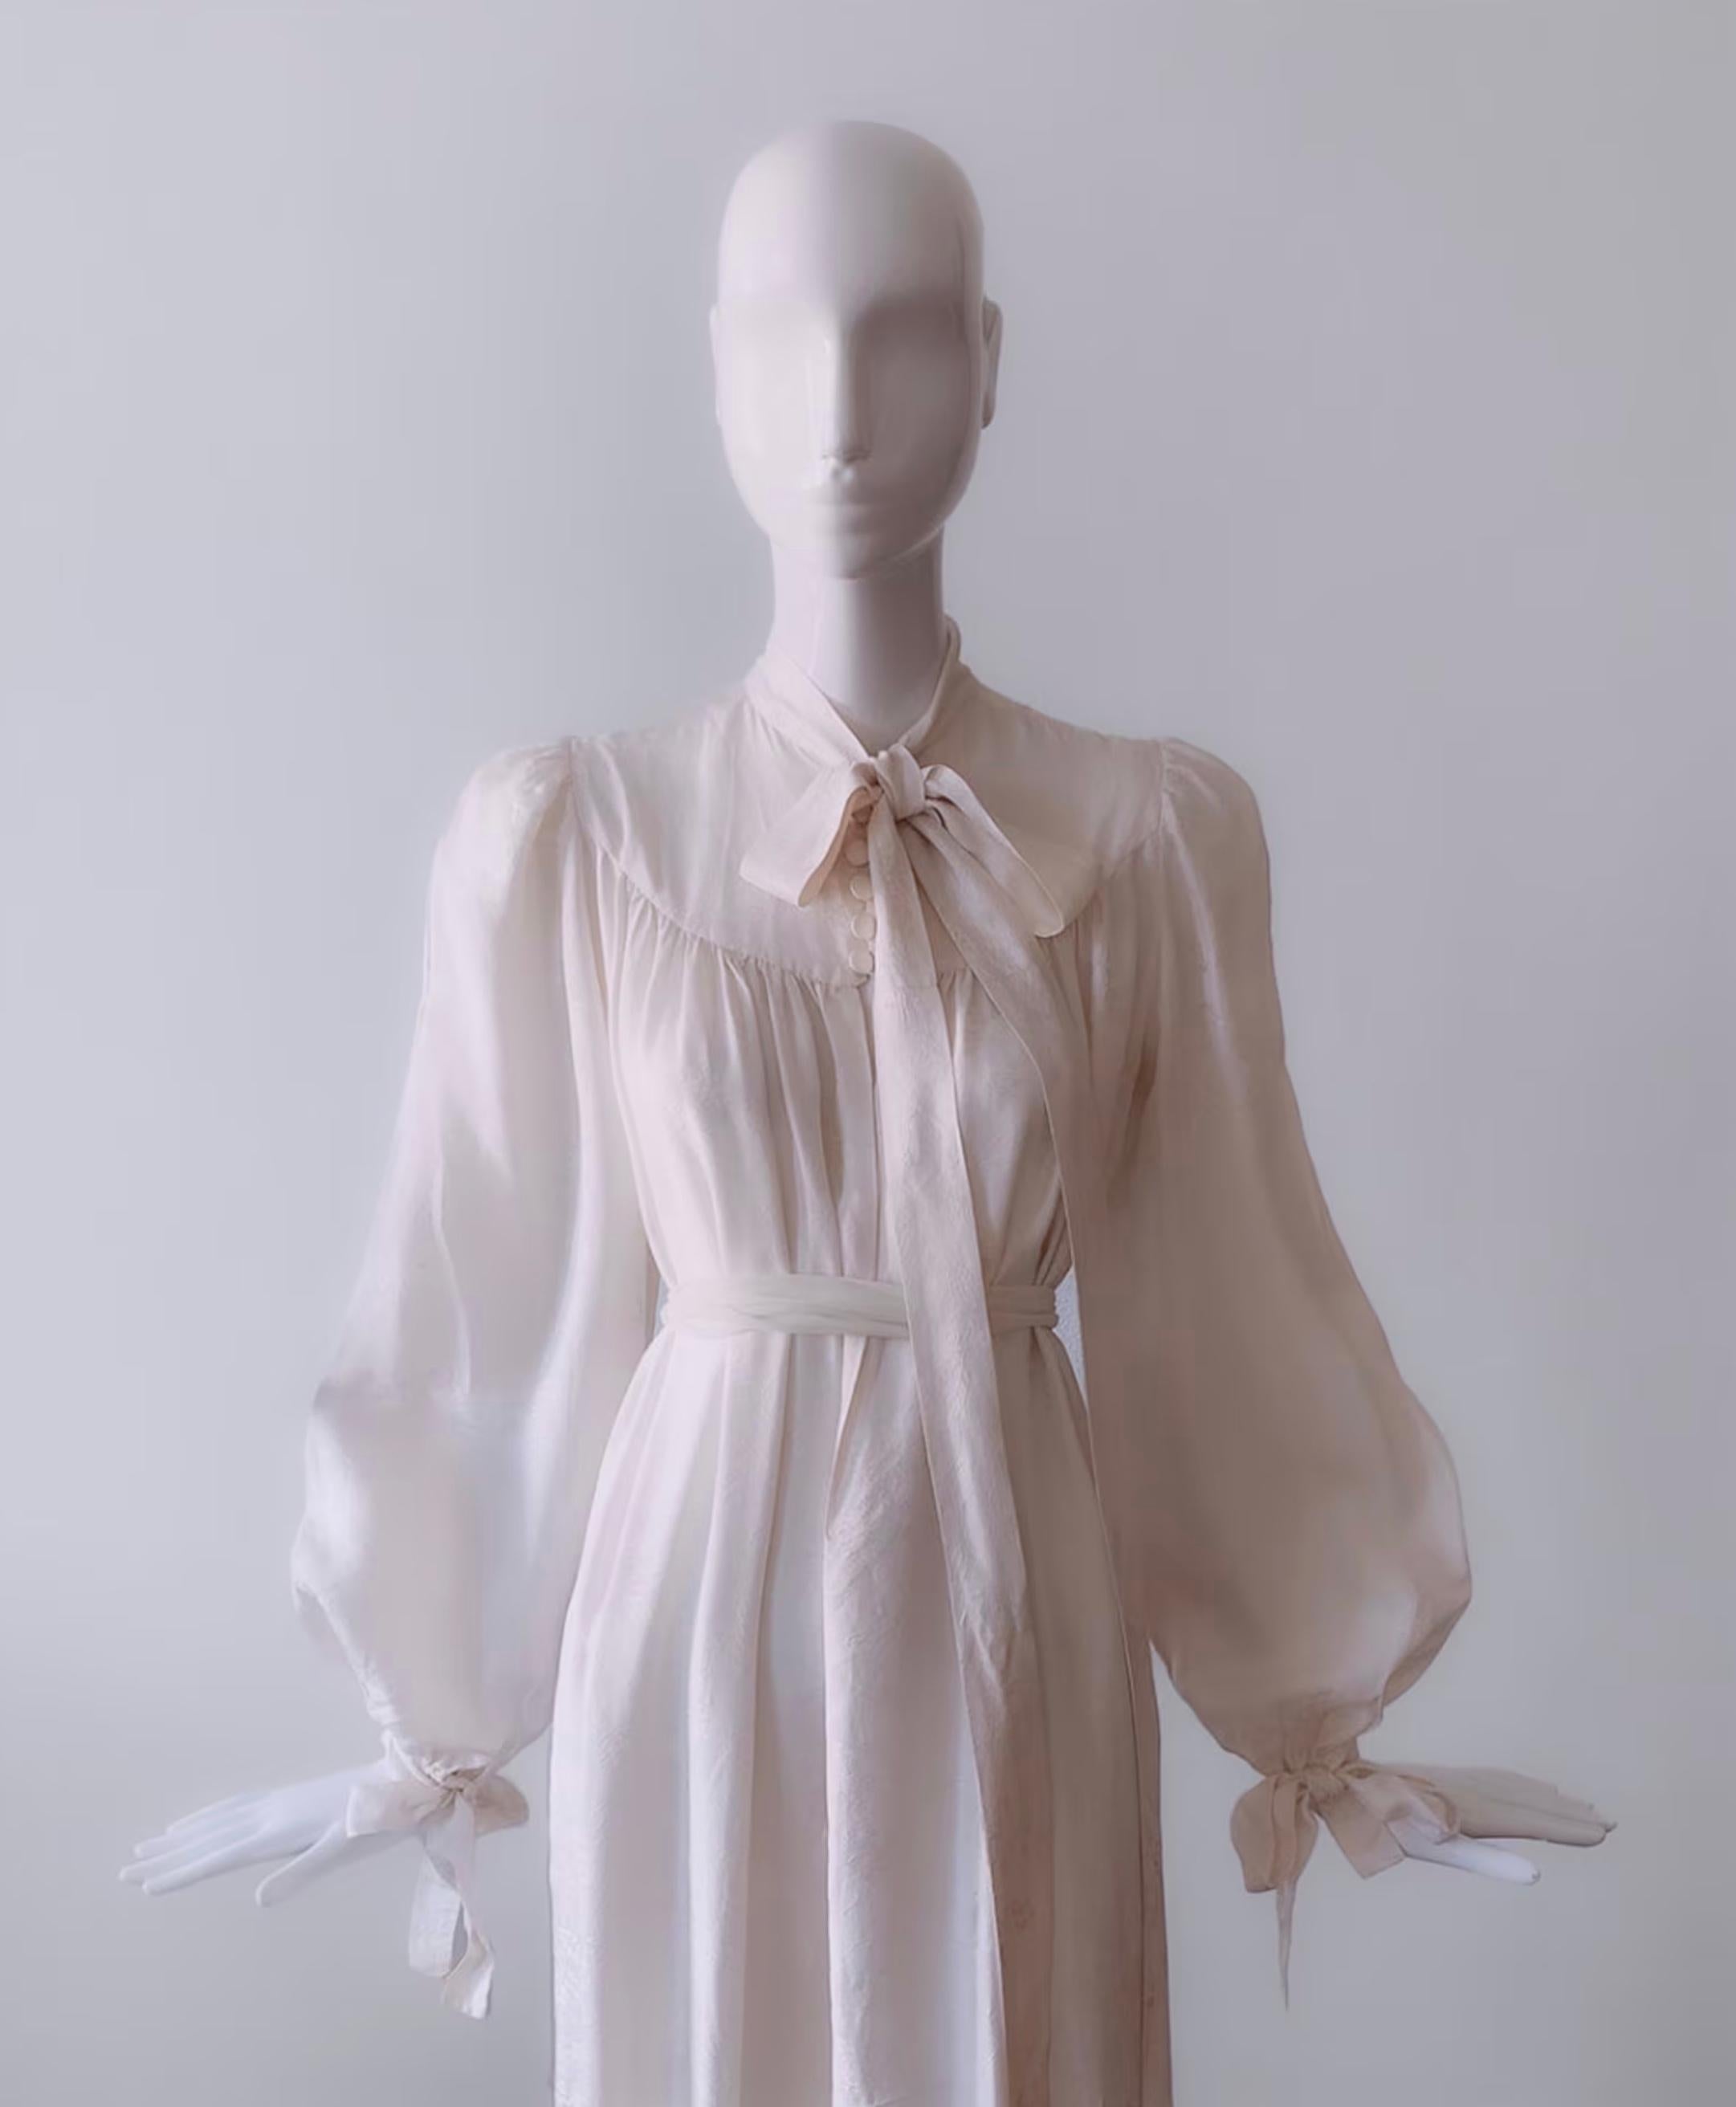 
Stunning extremely rare creation by Fashion Icon Jean-Louis Scherrer. The softest liquid pure silk. Long maxi dress designed in the free spirit of the 1970s: Beautiful long cascading floaty shape with big puffy poet sleeves that tie in bows and a